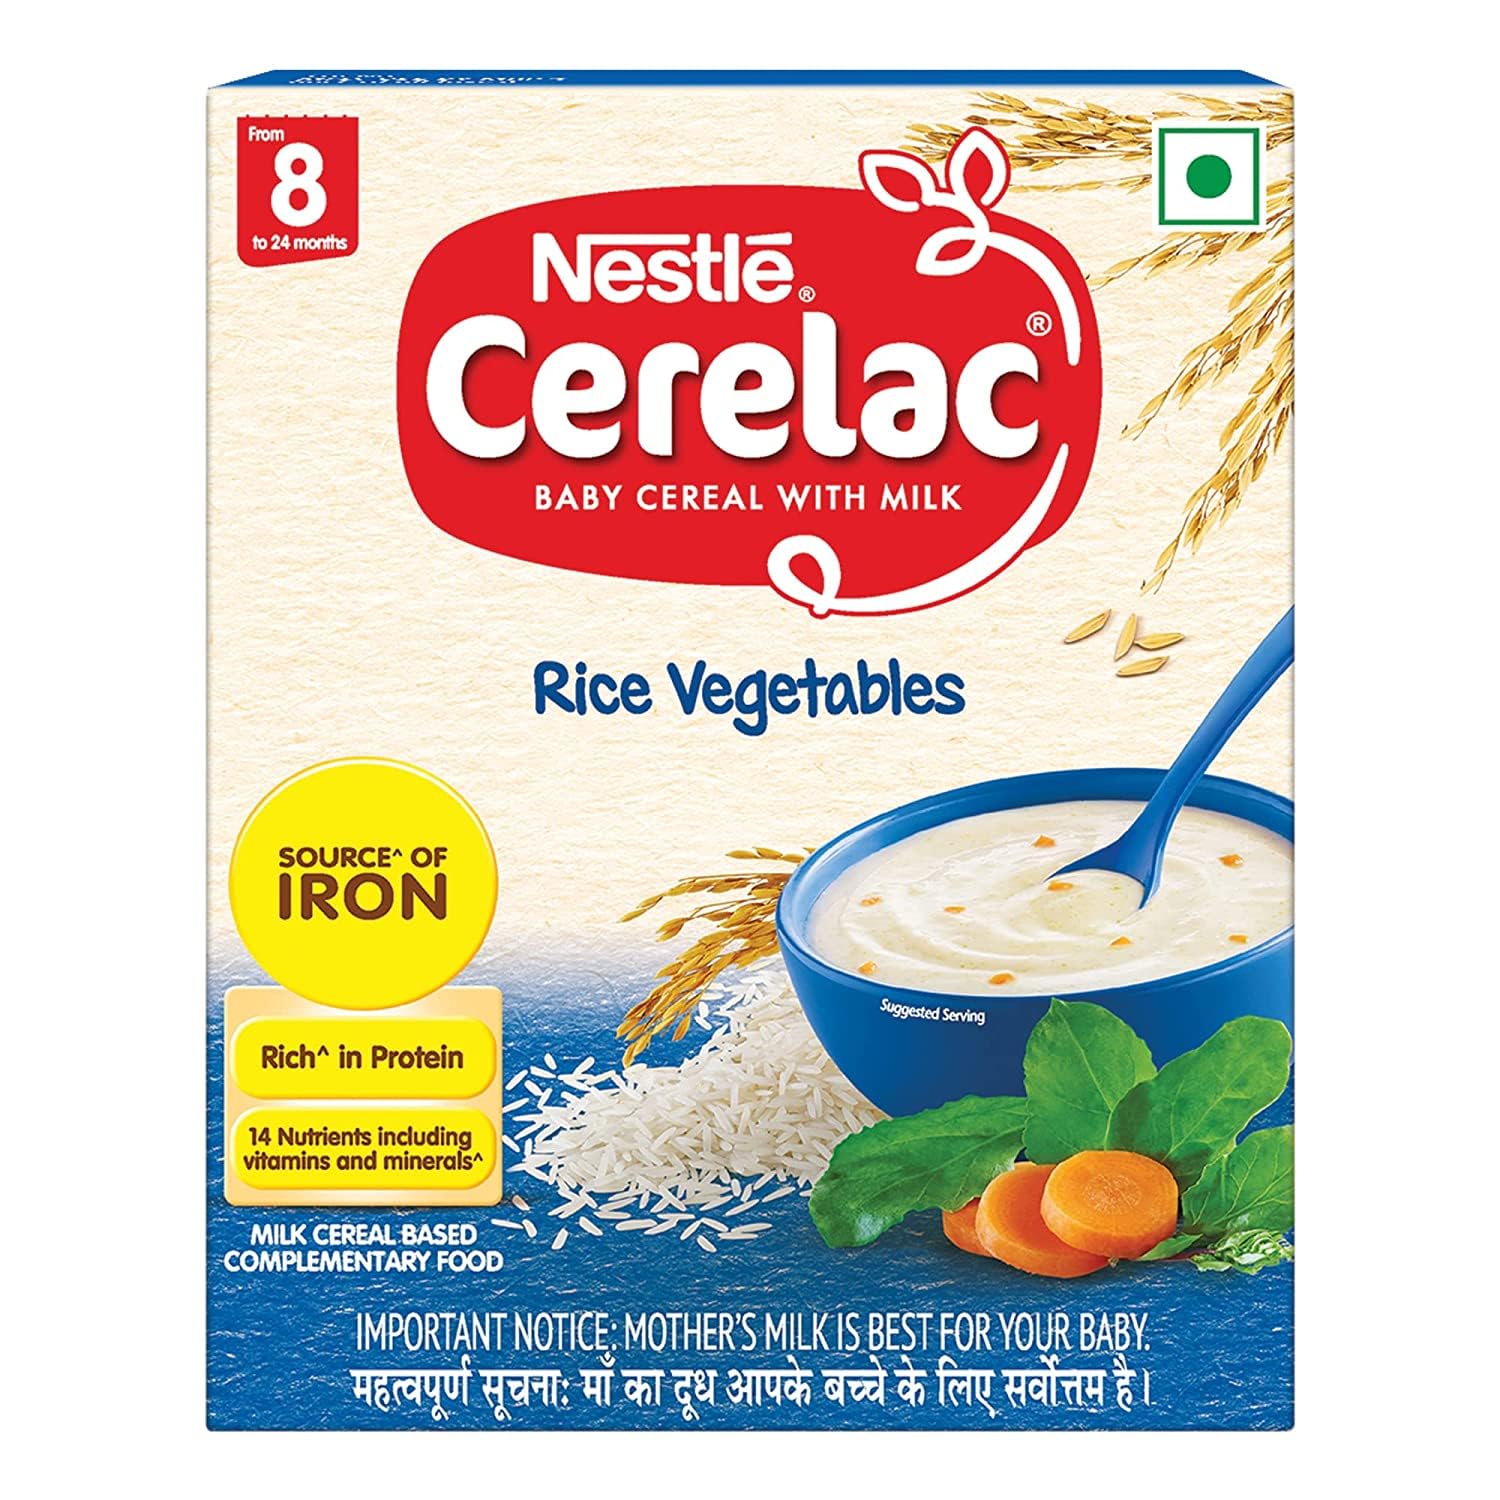 Nestle Cerelac Baby Cereal with Milk from 8 to 24 Months | Rich in Iron | Rice Vegetables